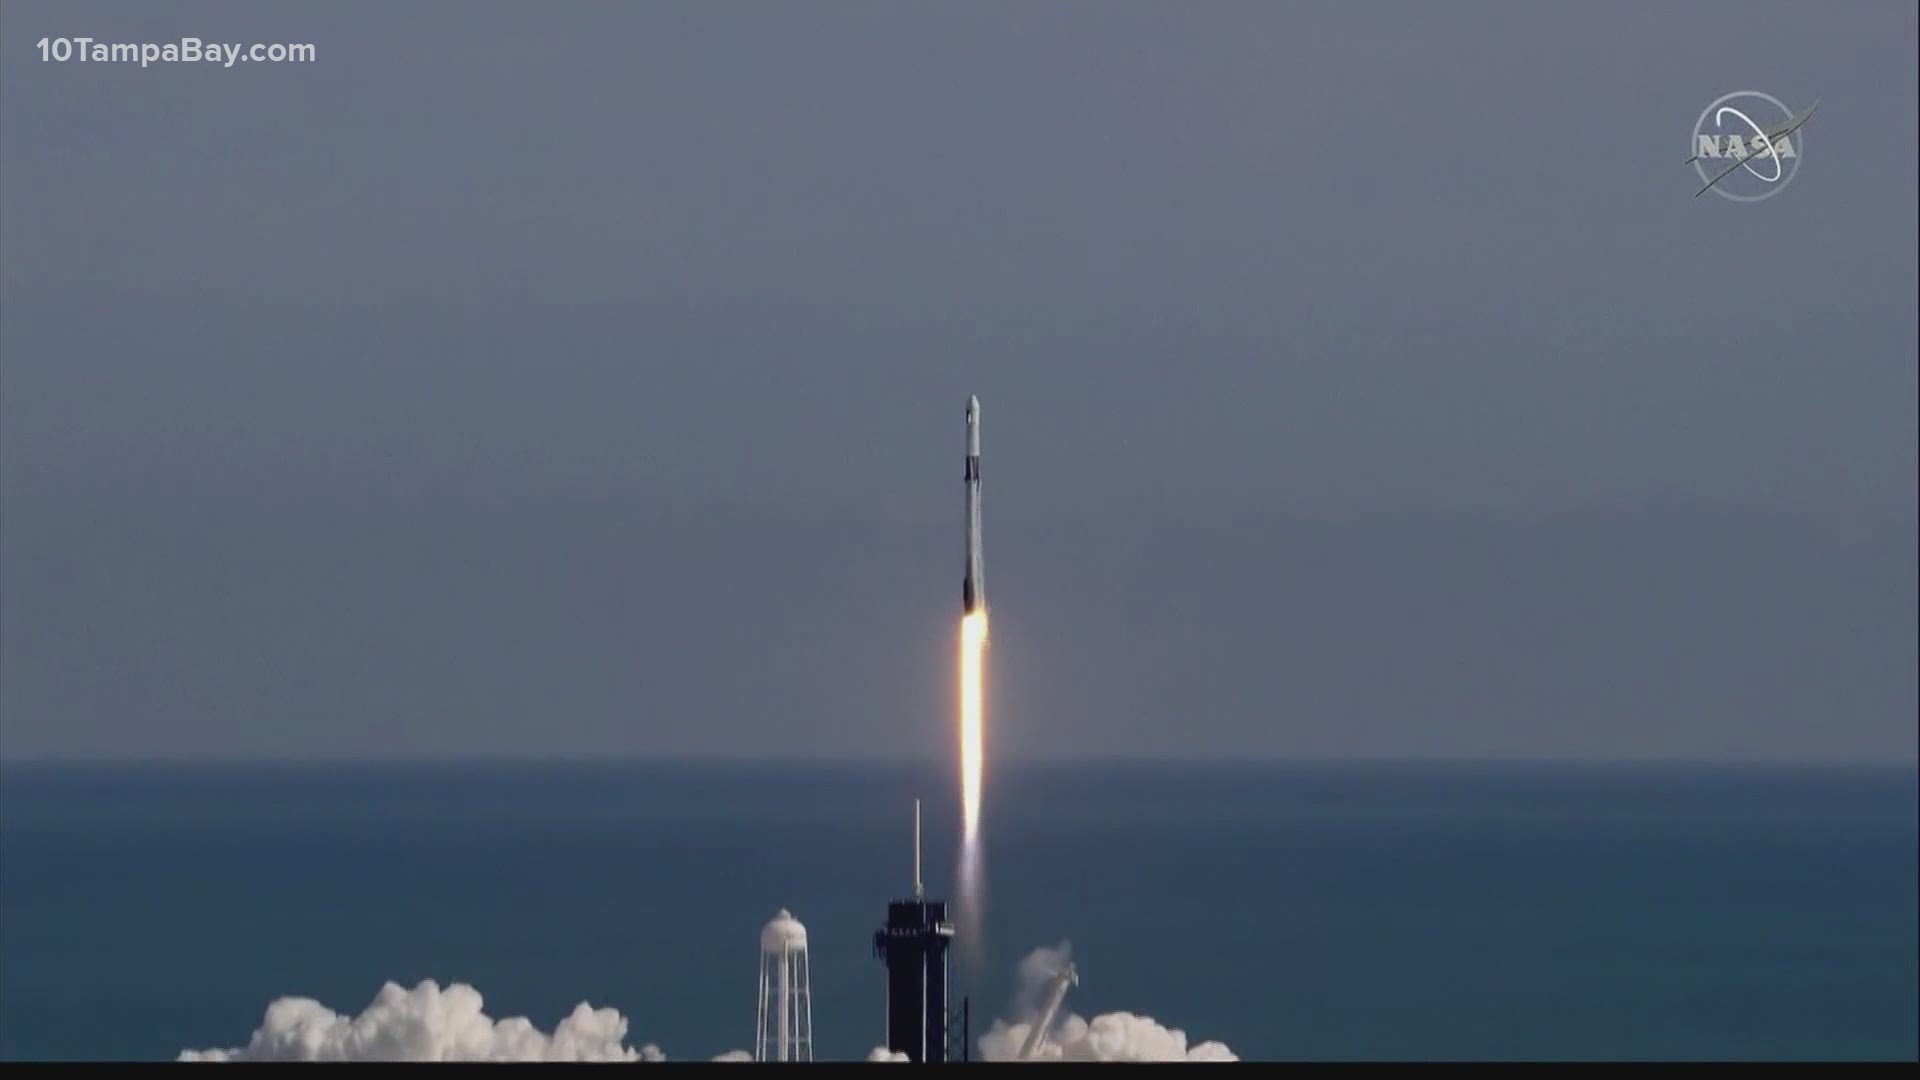 The launch is NASA's 21st commercial resupply mission.